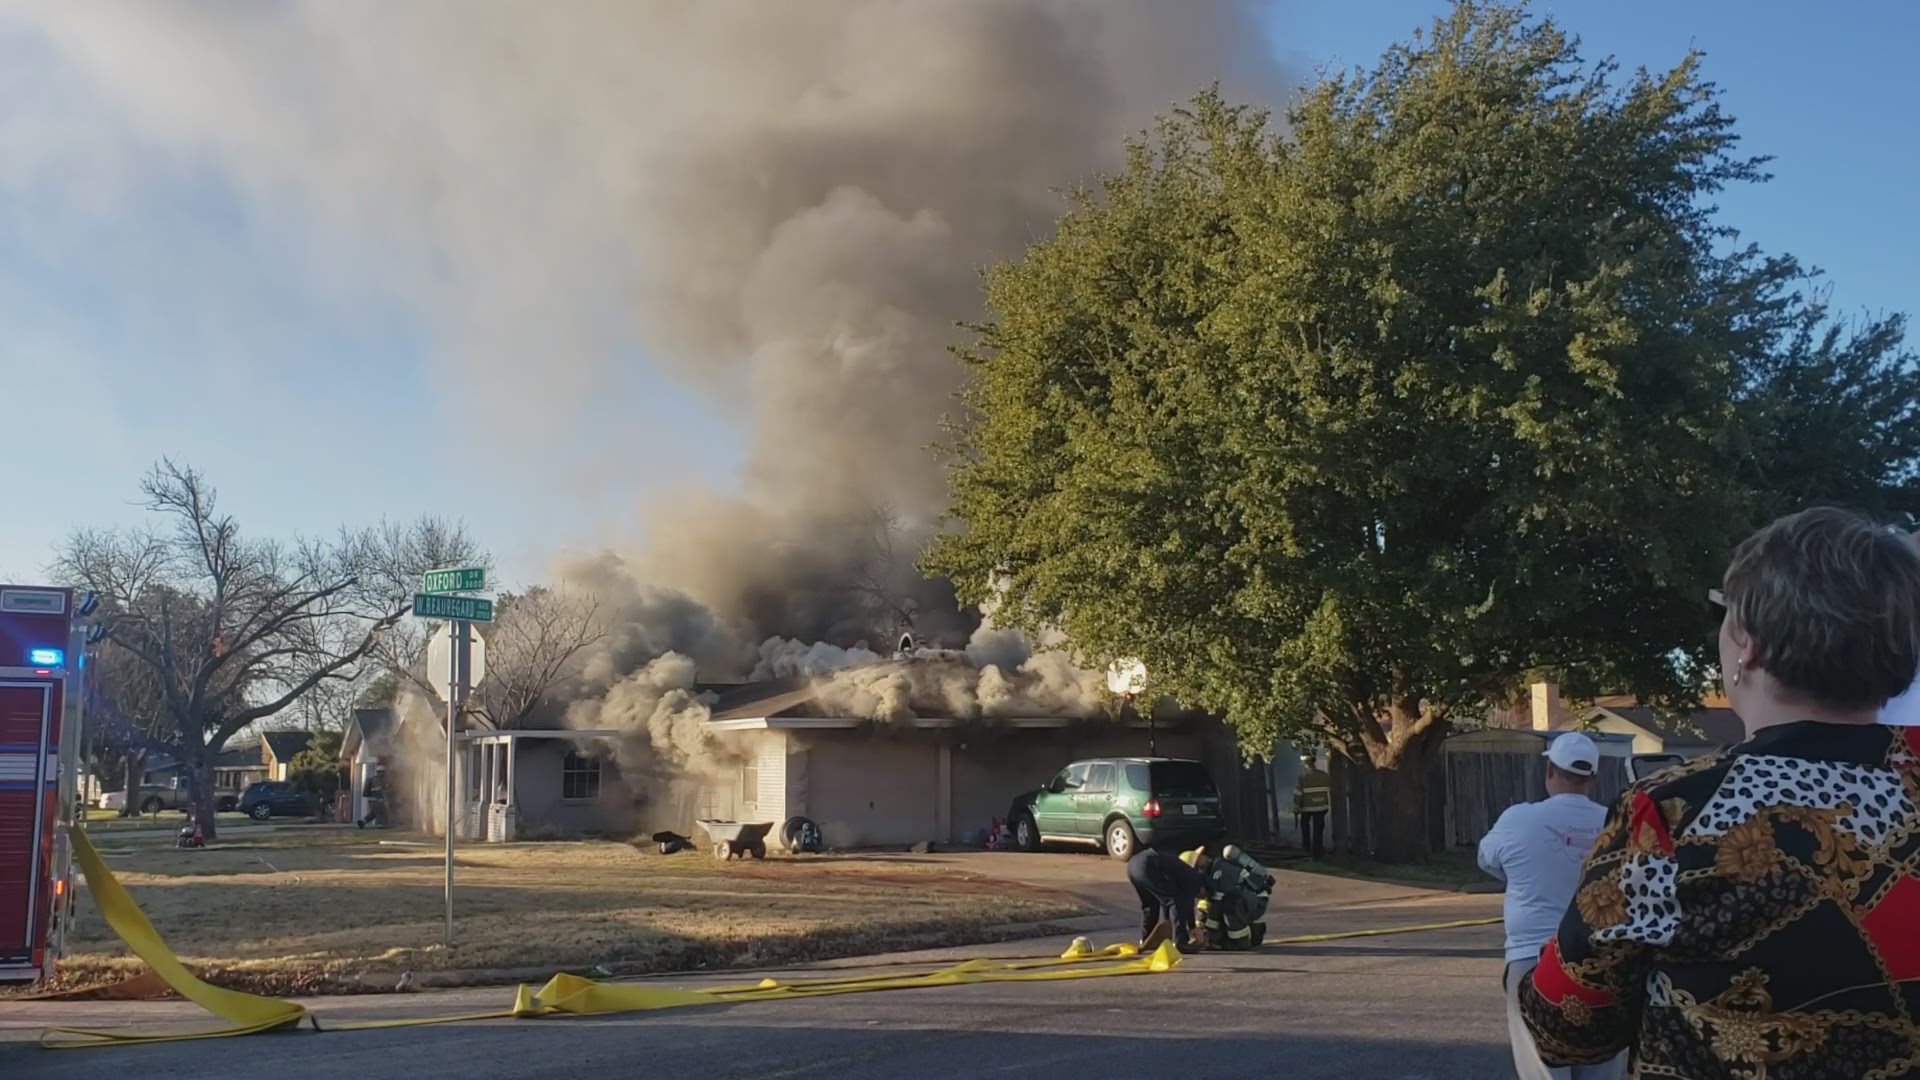 Multiple units from the San Angelo Fire Department responded to a fire at a residence on Oxford Drive.